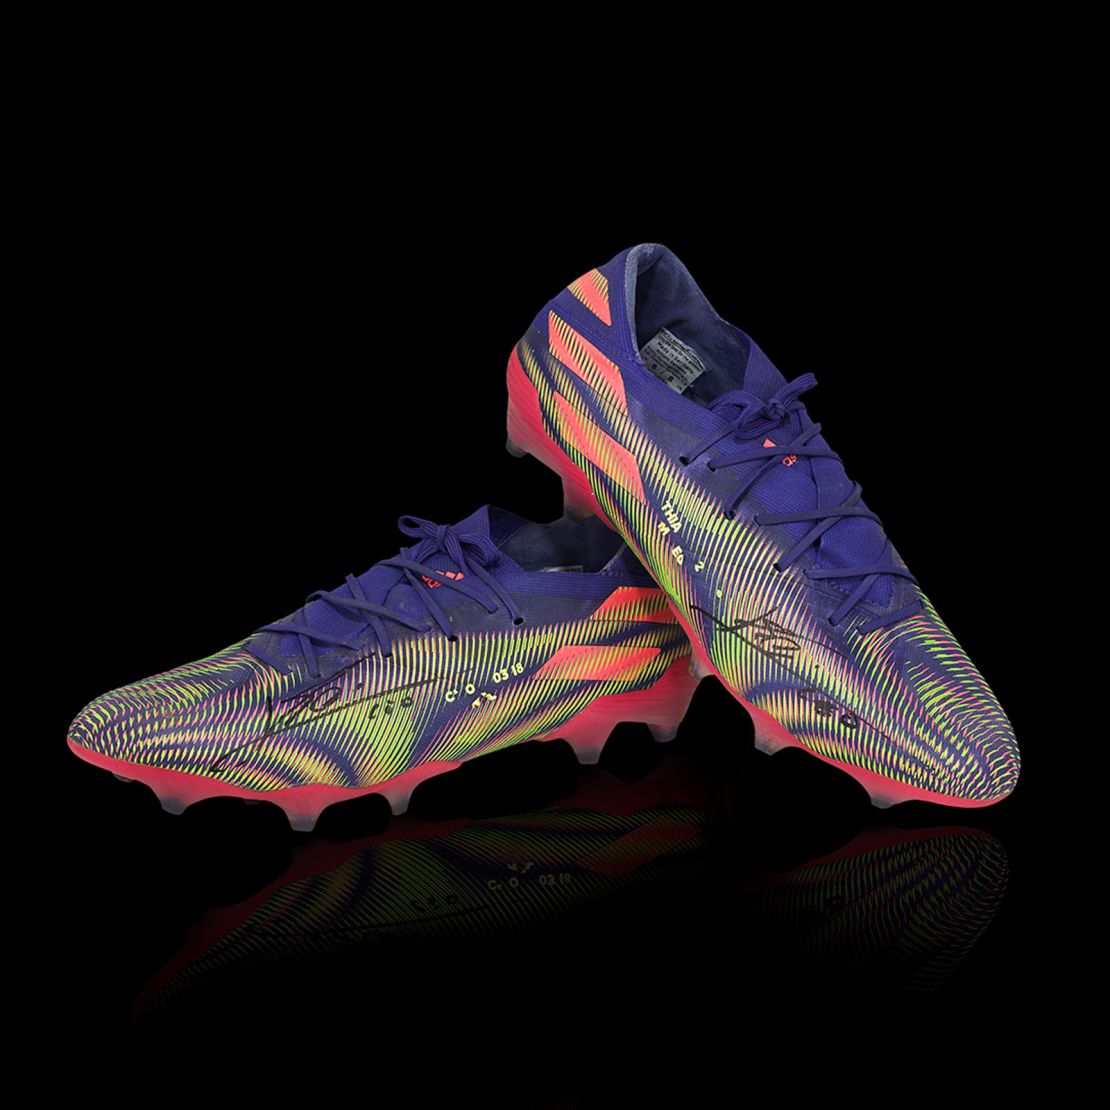 These boots were made for scoring goals ...